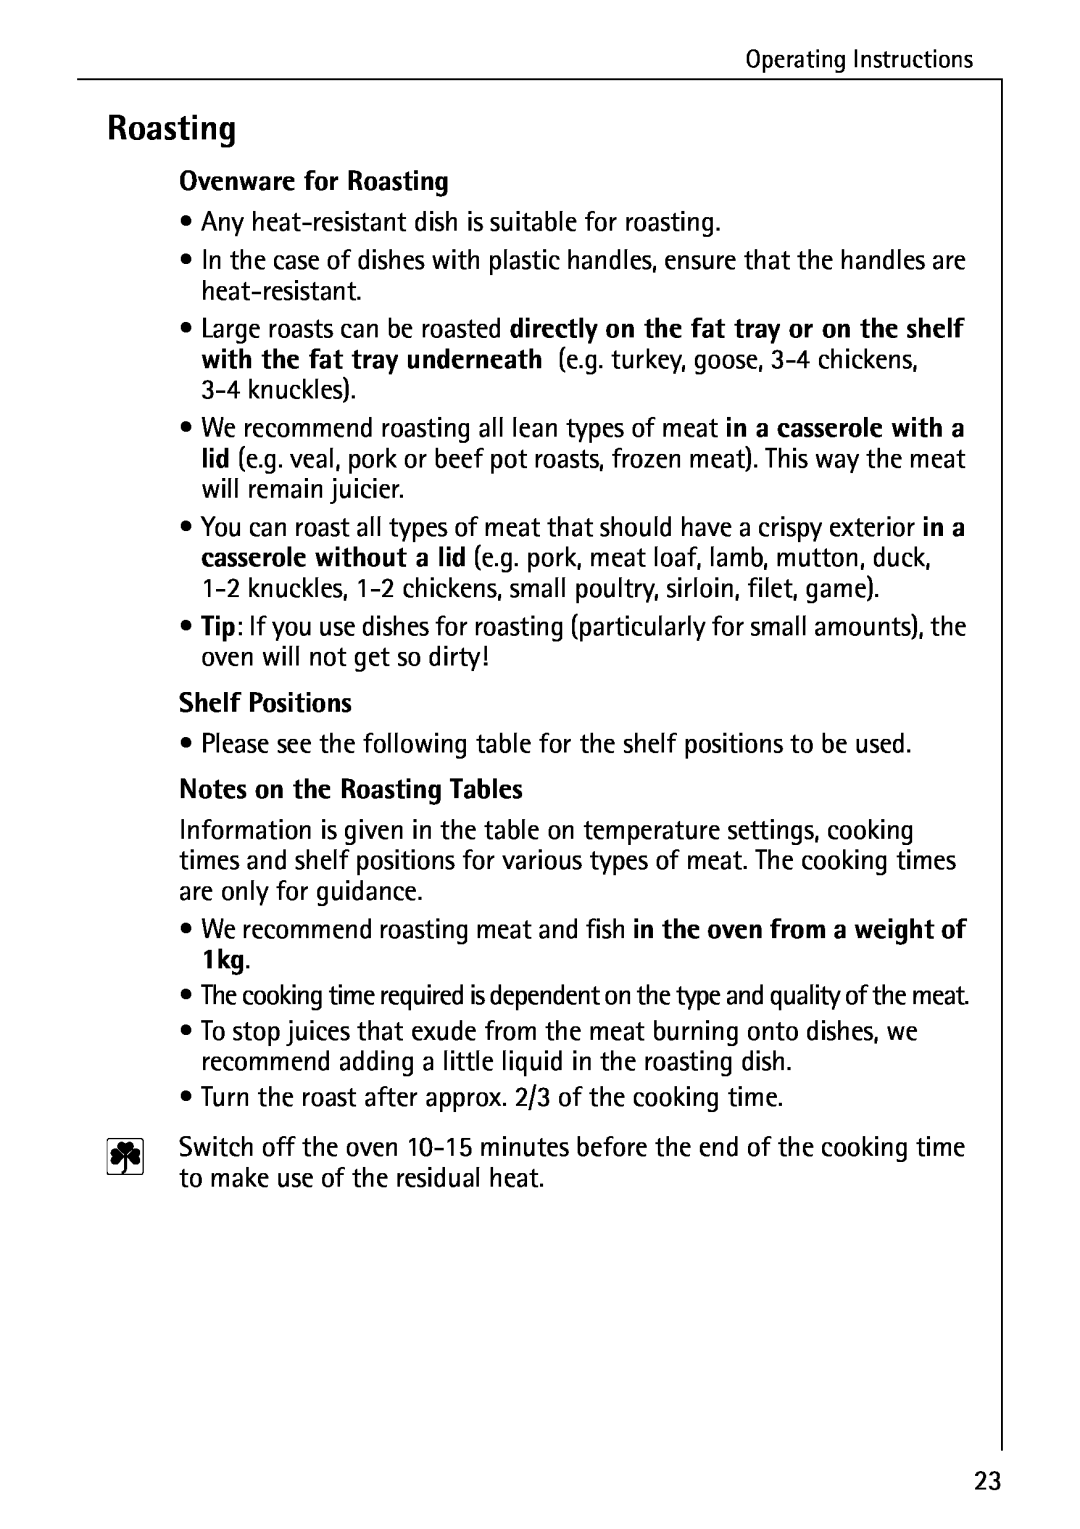 AEG 2003 F operating instructions Ovenware for Roasting, Notes on the Roasting Tables, Shelf Positions 